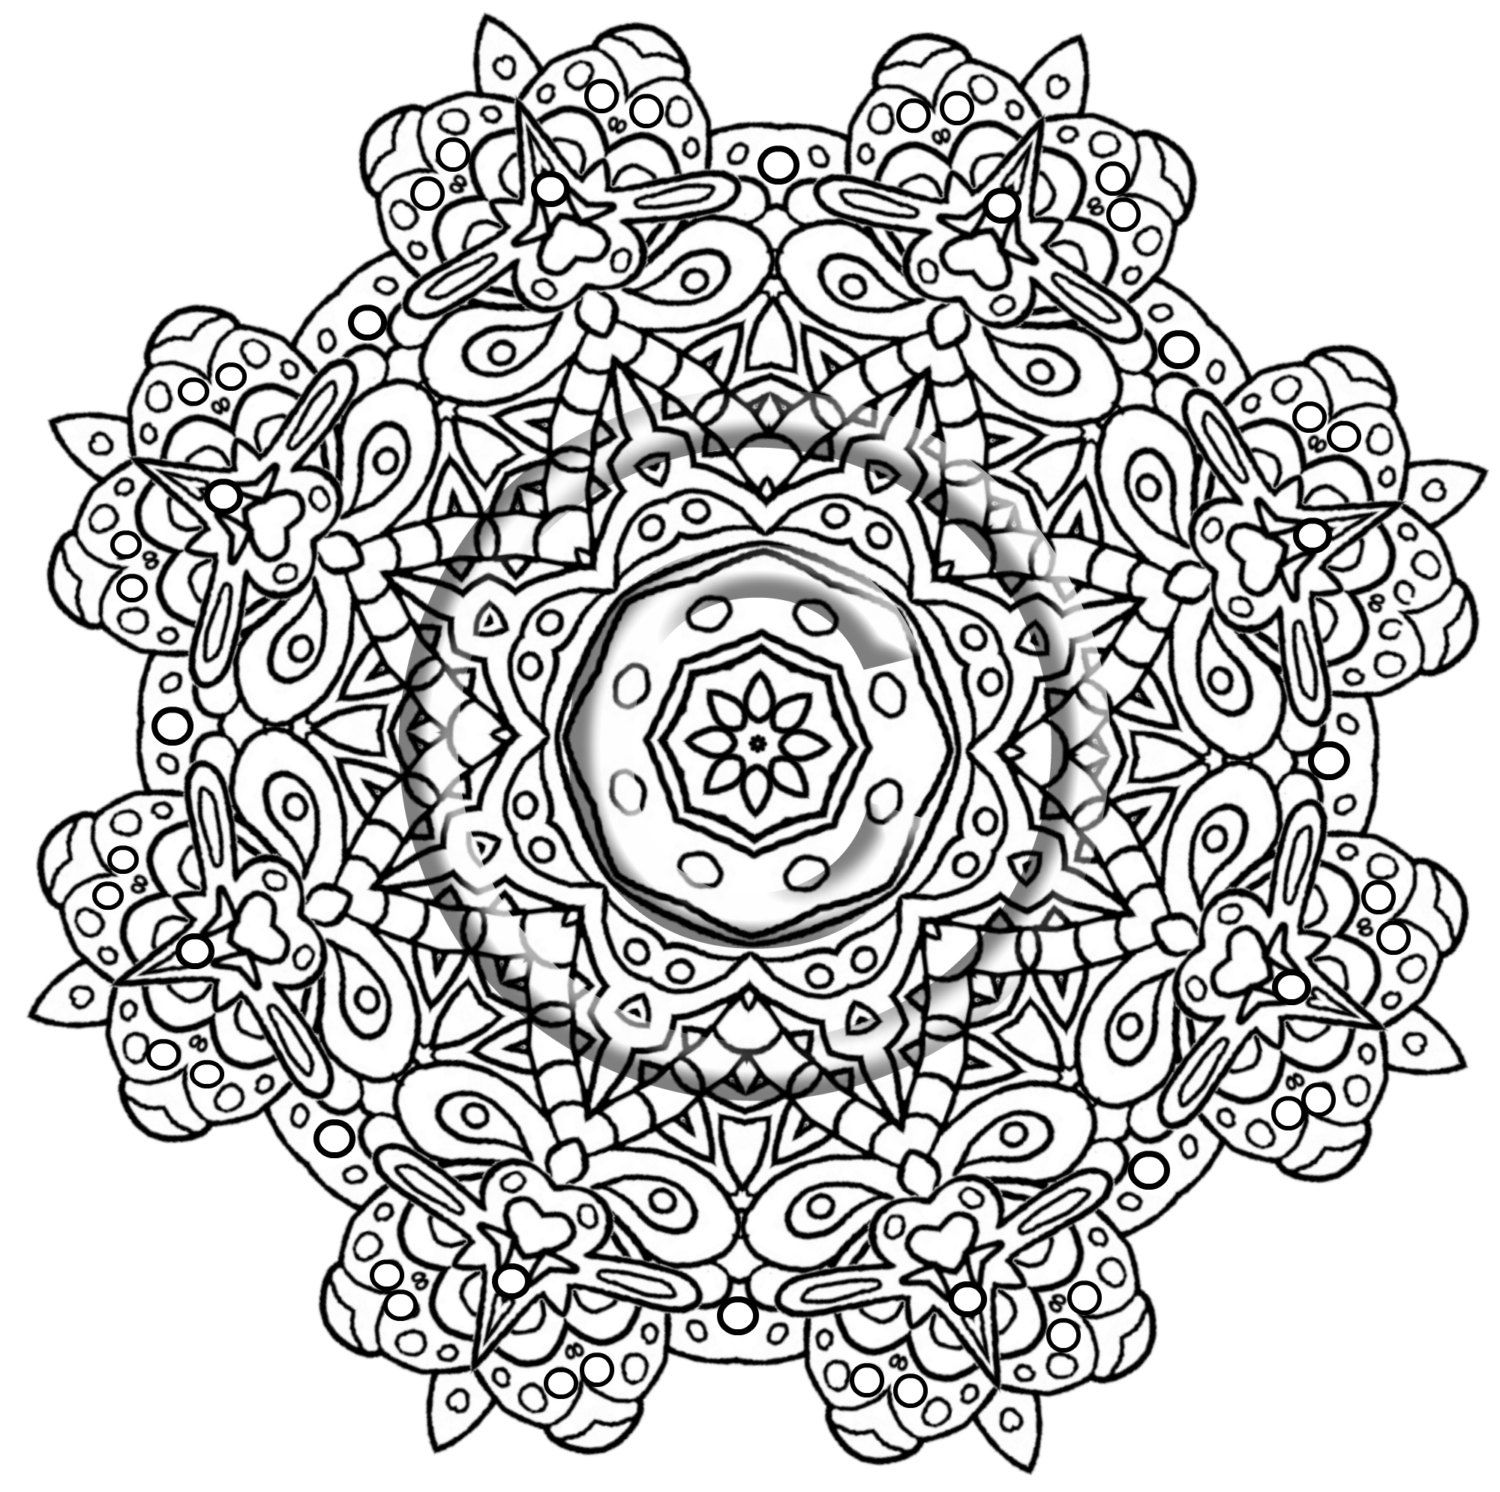 12 Pics of Intricate Flower Coloring Pages - Intricate Mandala ...